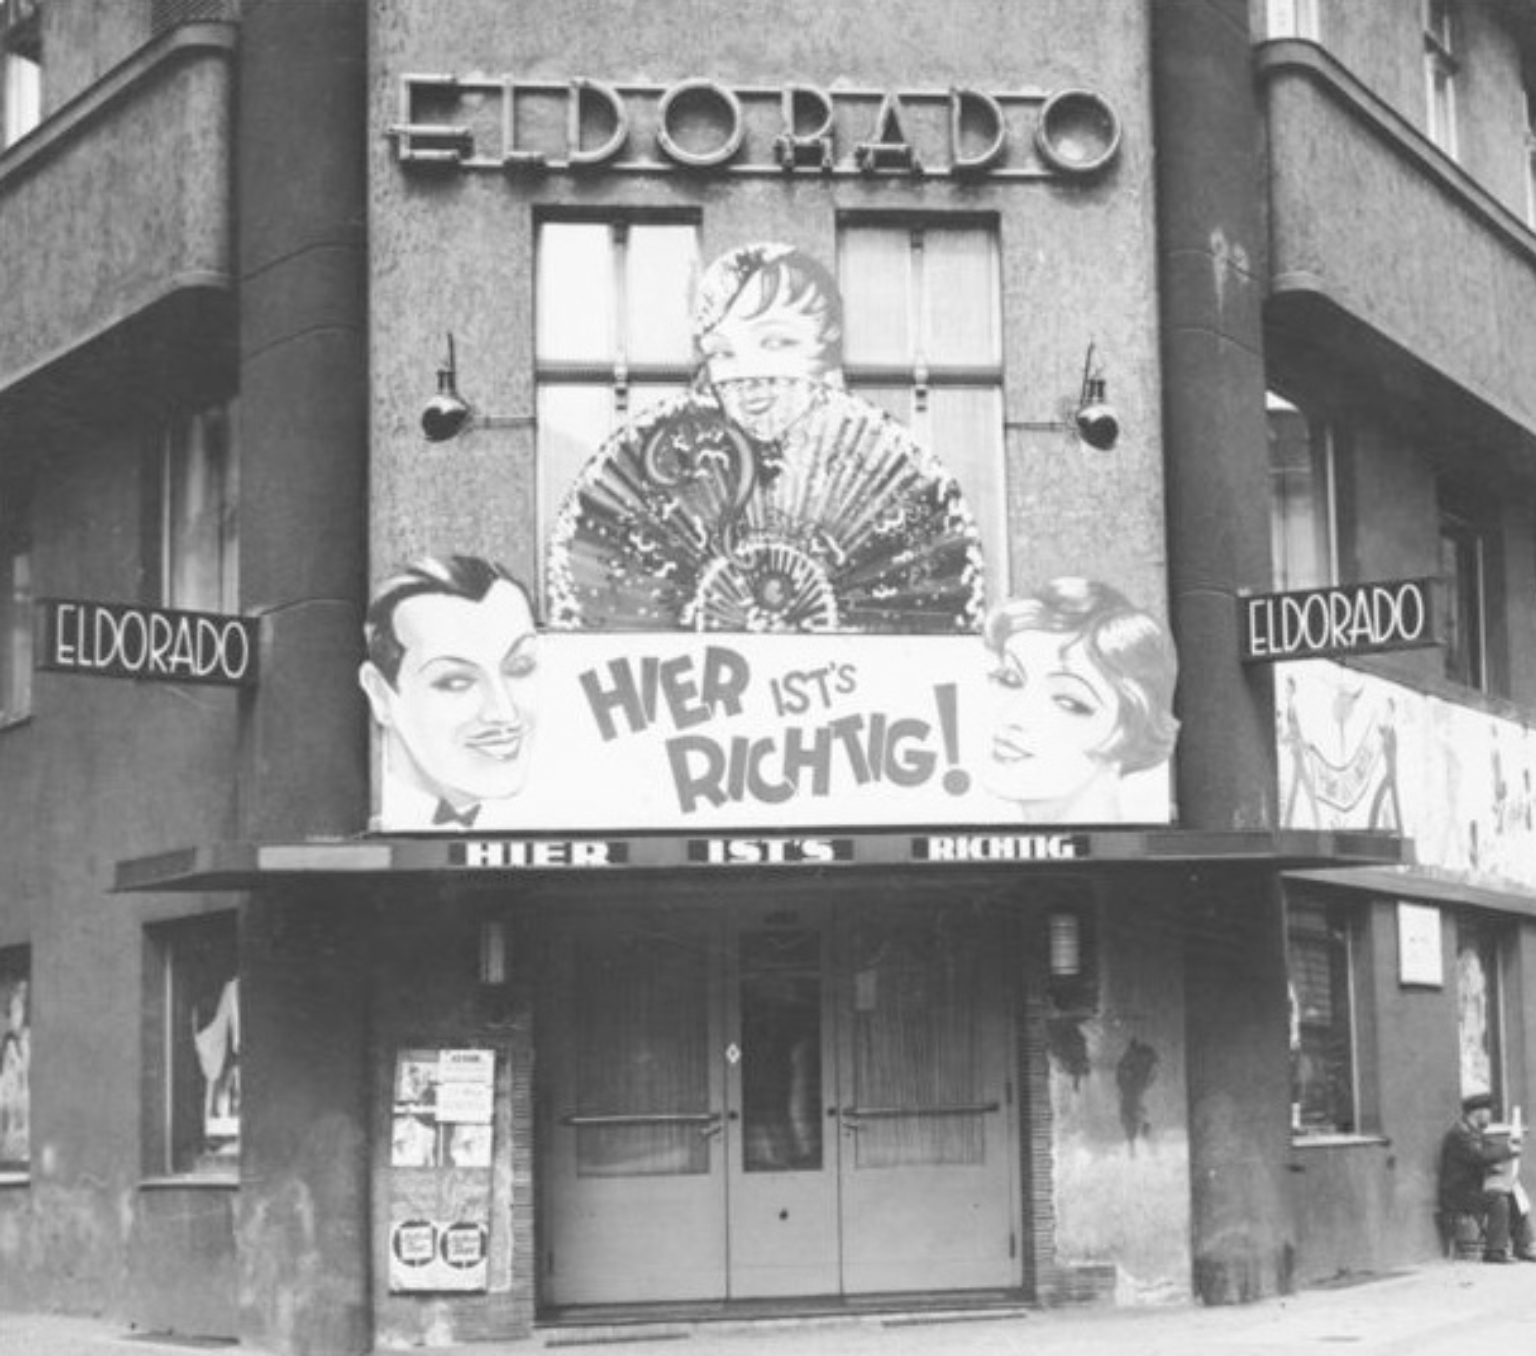 A 1930's nightclub with the name Elorado signposed high on the facade. A banner with the faces of a man and a woman has the phrase "Hier Ist's Richtig" above the door.